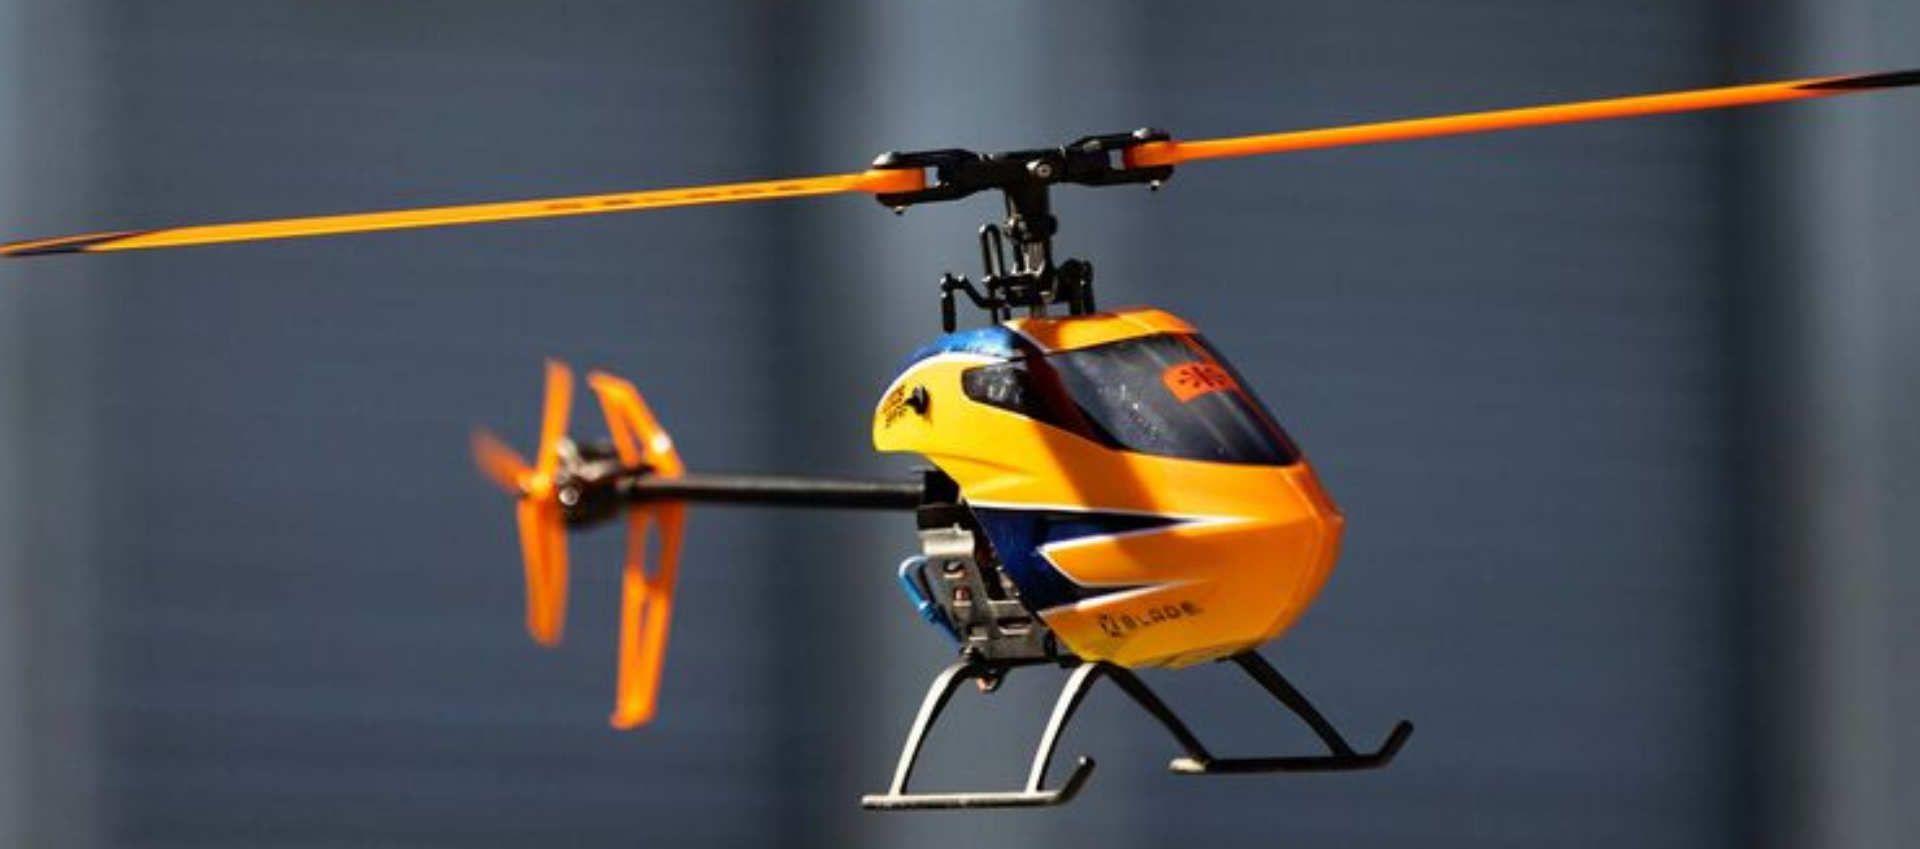 Ninja Rc Helicopter: Comparing the Ninja RC Helicopter with Competitor A and B: Price, Flight Time, and Range.